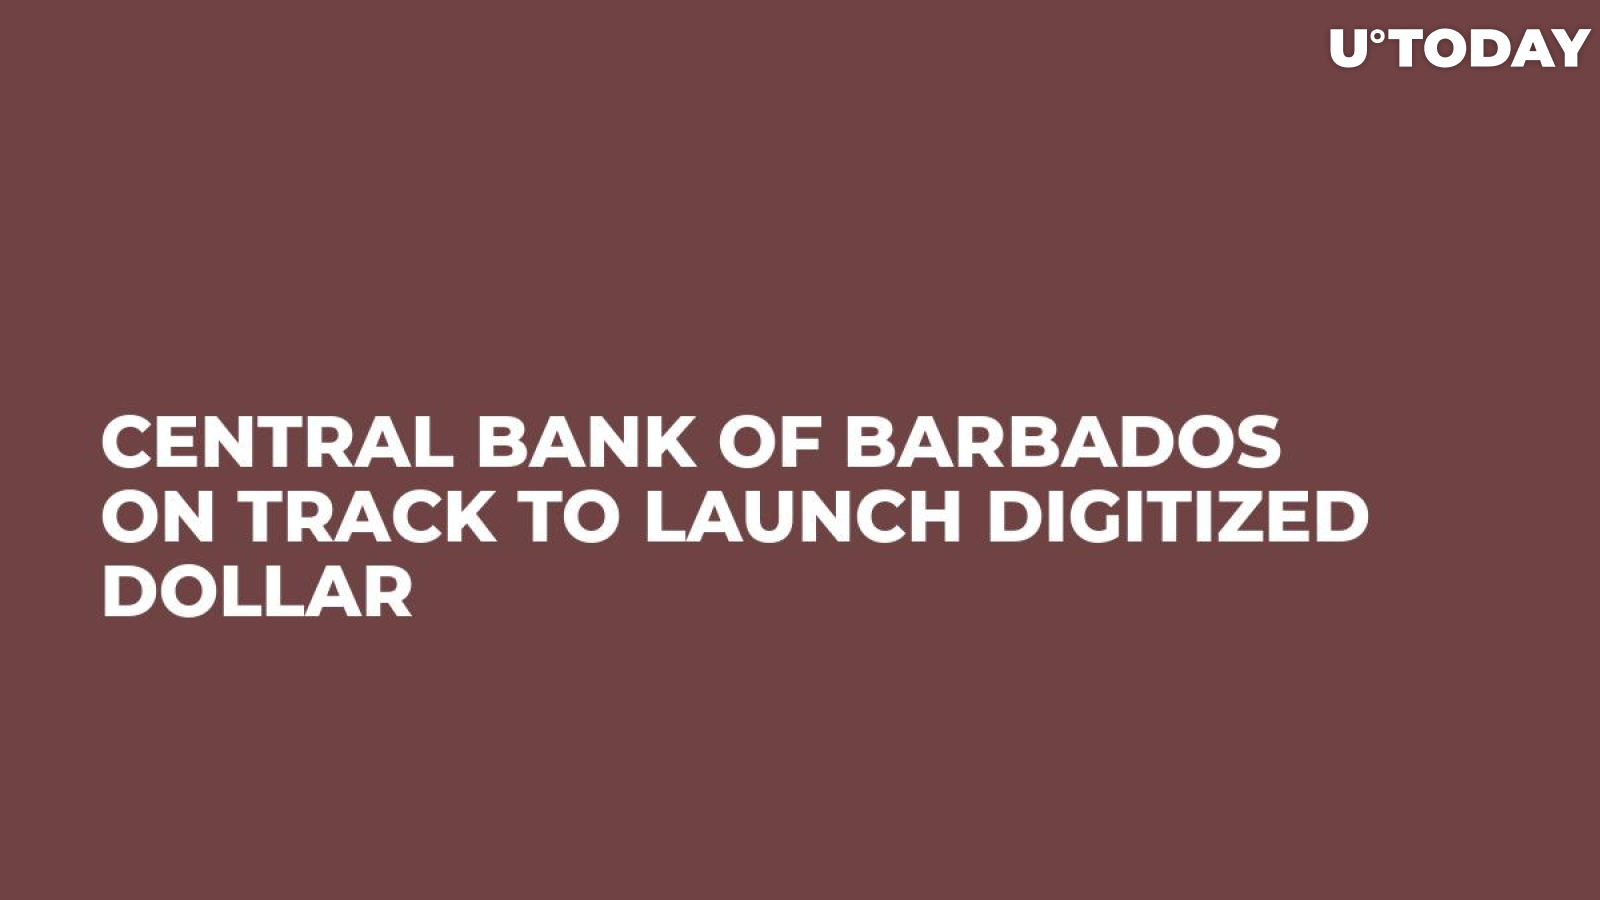 Central Bank of Barbados on Track to Launch Digitized Dollar